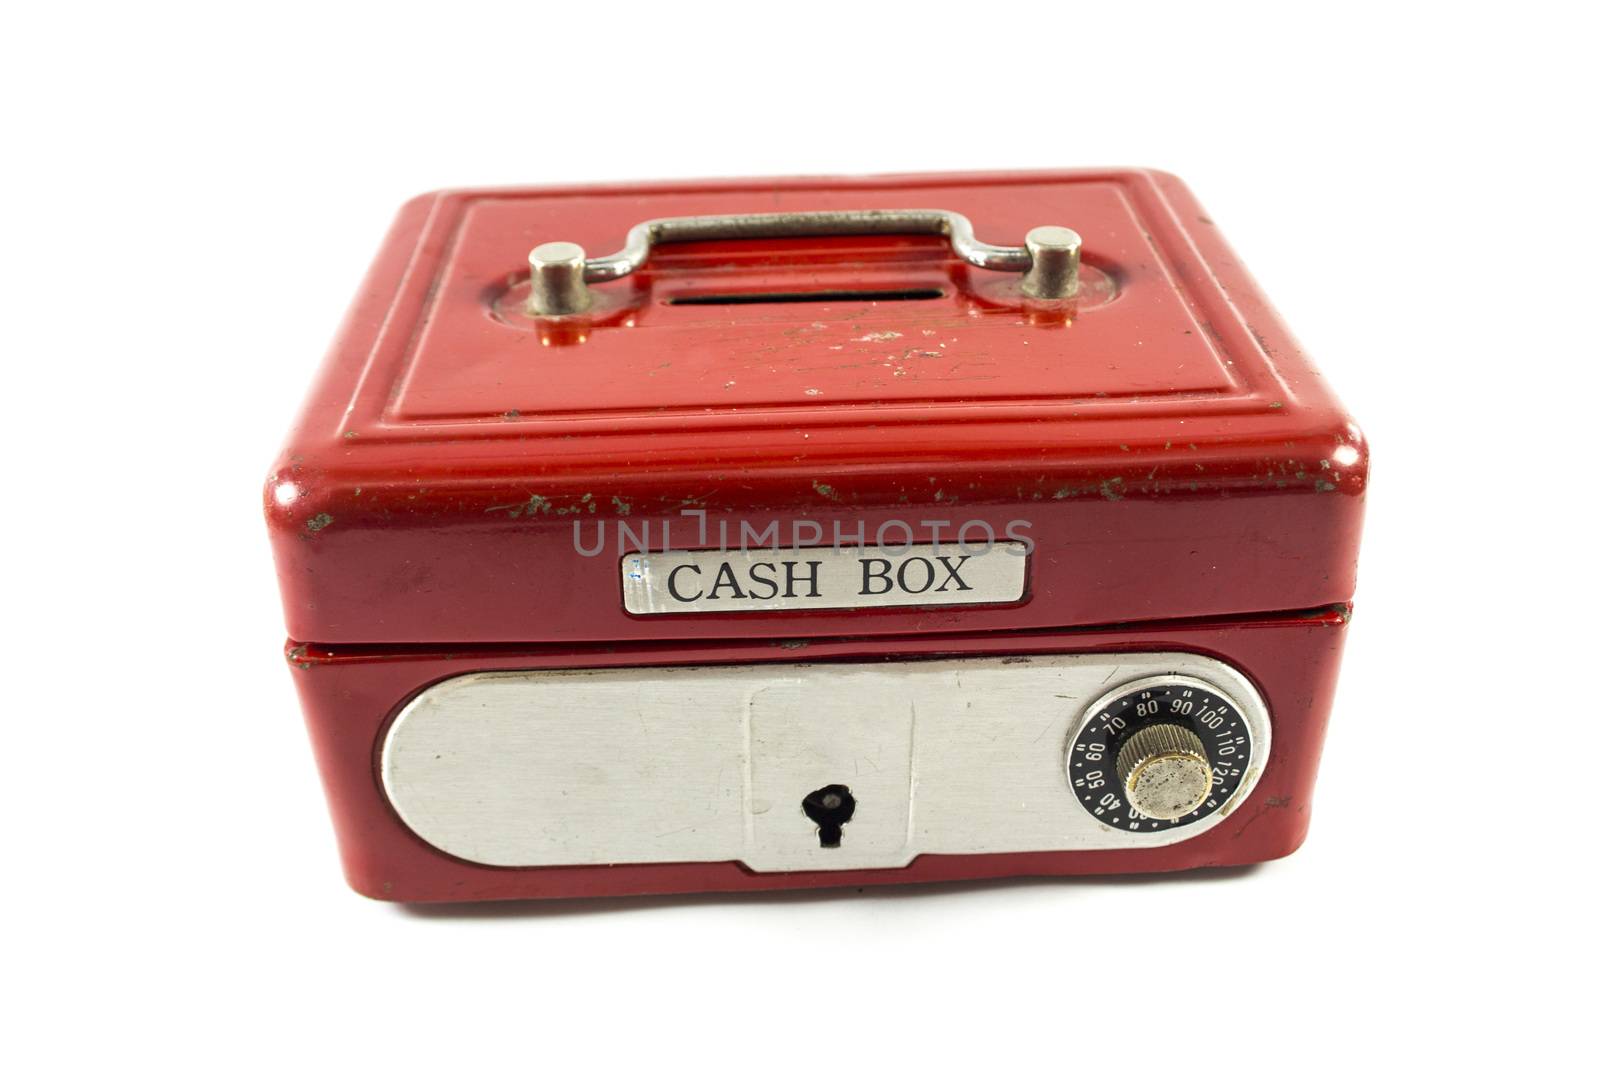 Red cash box on white background.